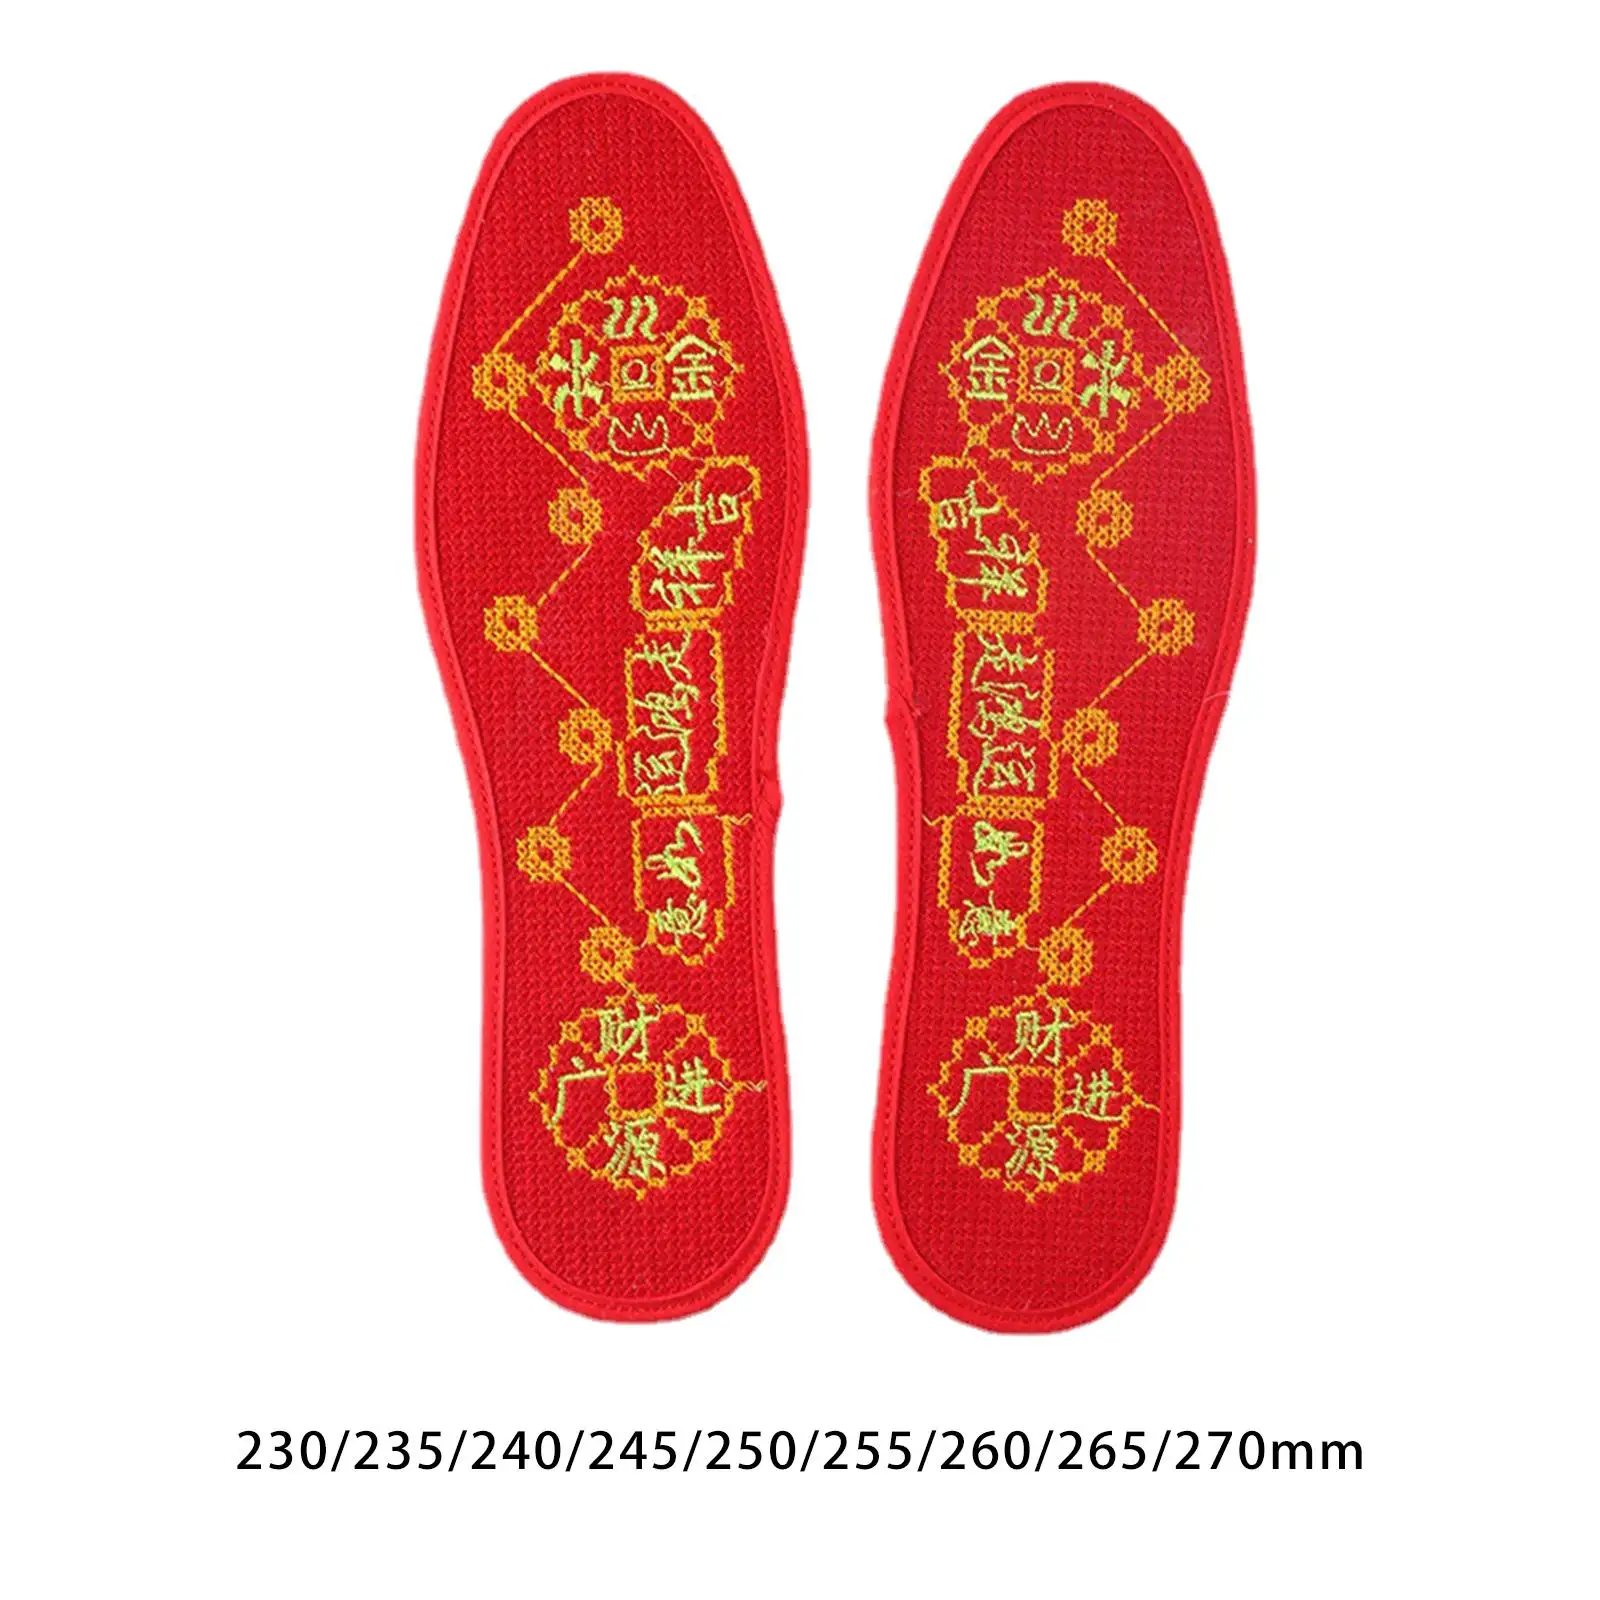 Feng Shui Seven Coins Insoles Wear Resistant Boot Insoles Sweat Absorbent Feng Shui Insoles Shoes Insert Red for Unisex Sports